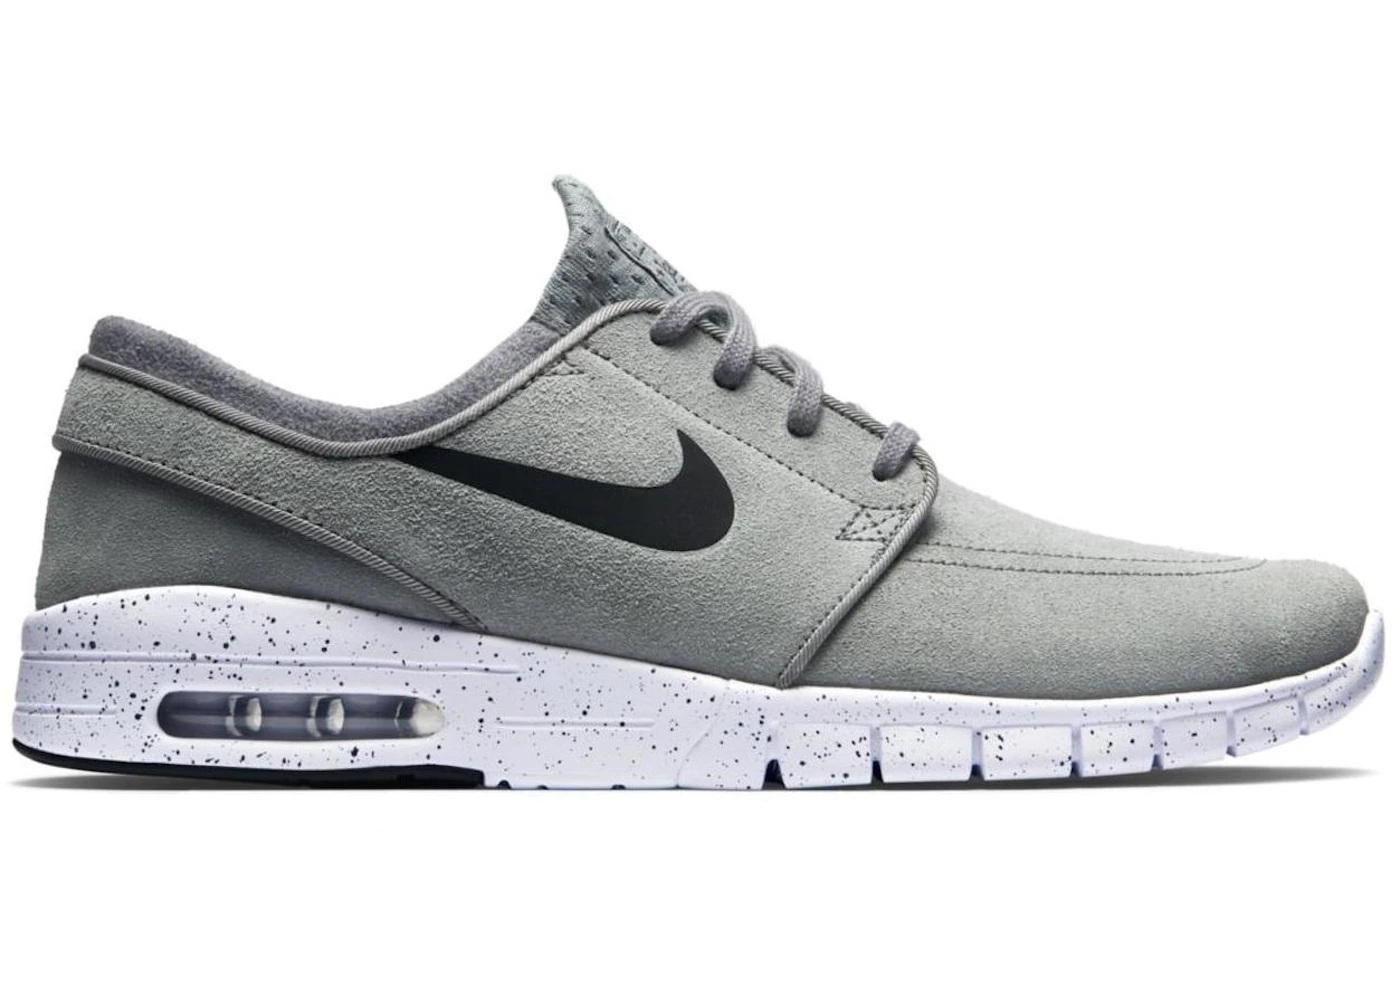 spy Wolf in sheep's clothing Quite Nike SB Stefan Janoski Max Leather Cool Grey - 685299-011 - US